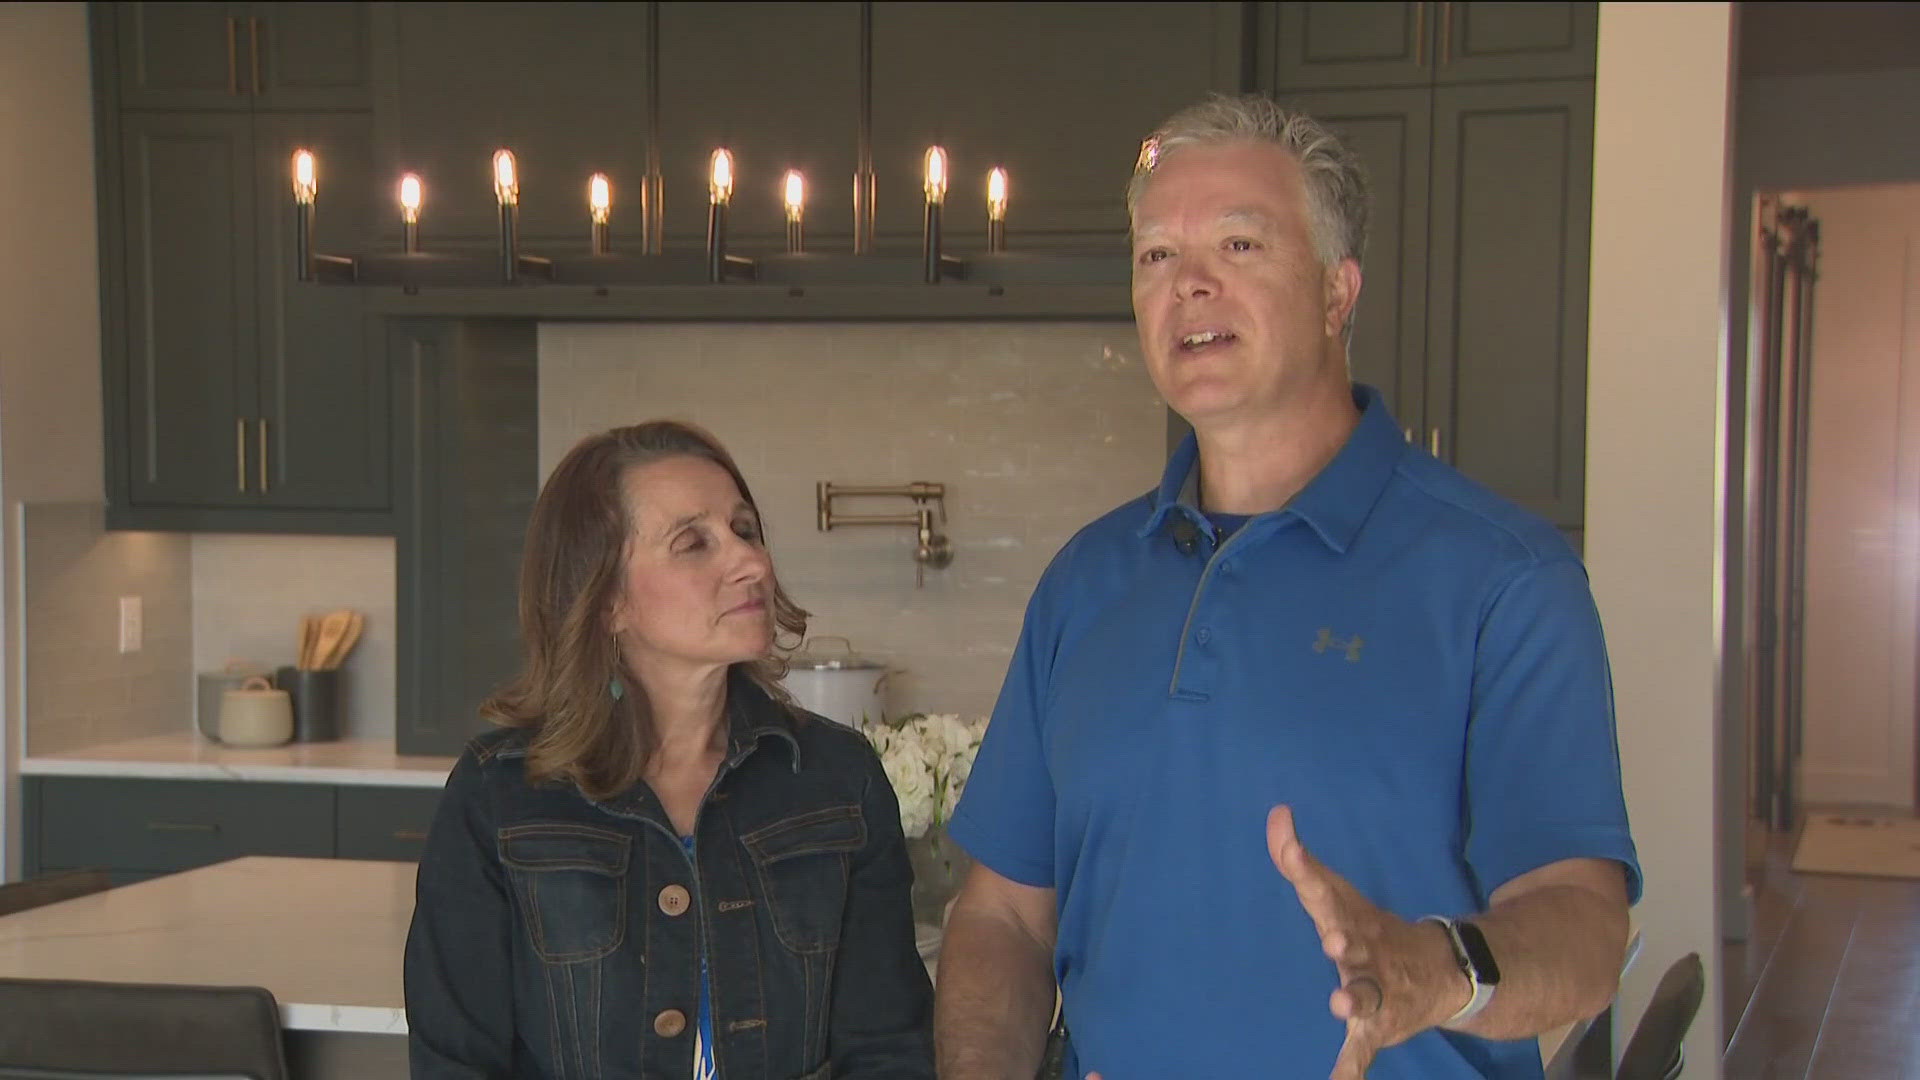 Louis and Nicole Flores spoke to KTVB about how they figured out they won the home.